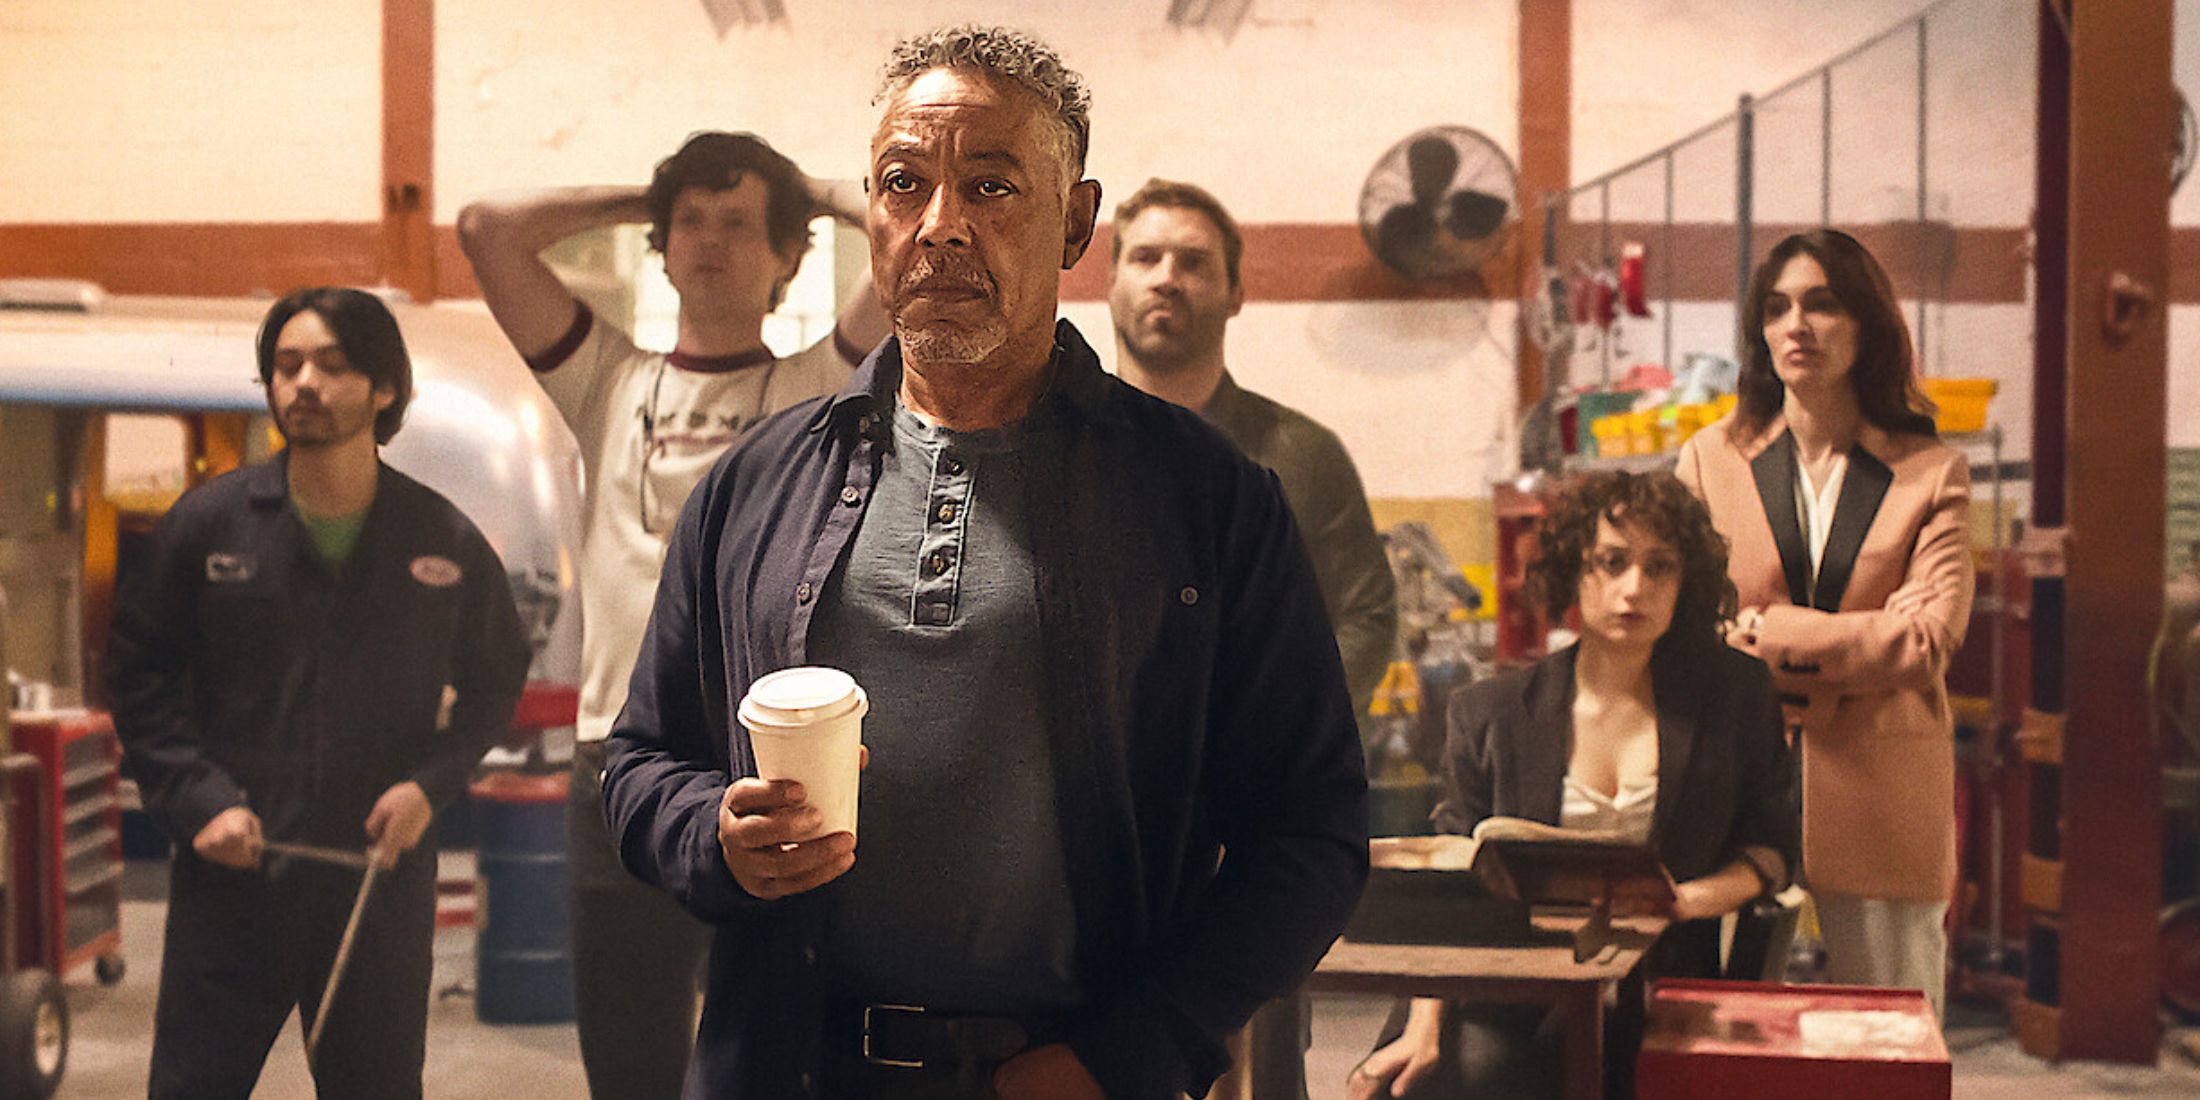 Giancarlo Esposito at the front of the heist team in Kaleidoscope